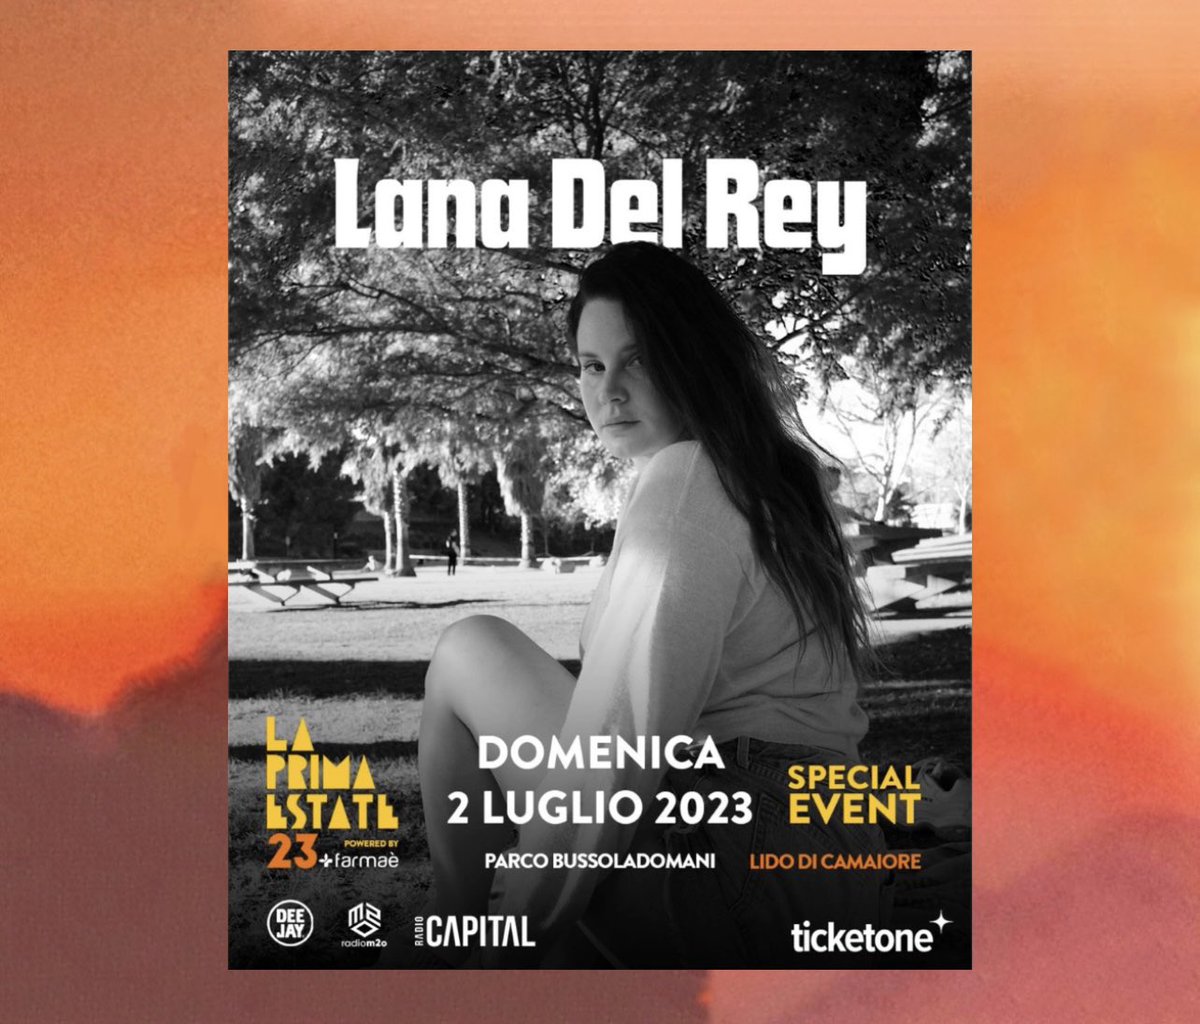 Lana Del Rey will be performing in Italy next Sunday at the La Prima Estate Festival ❤️🇮🇹